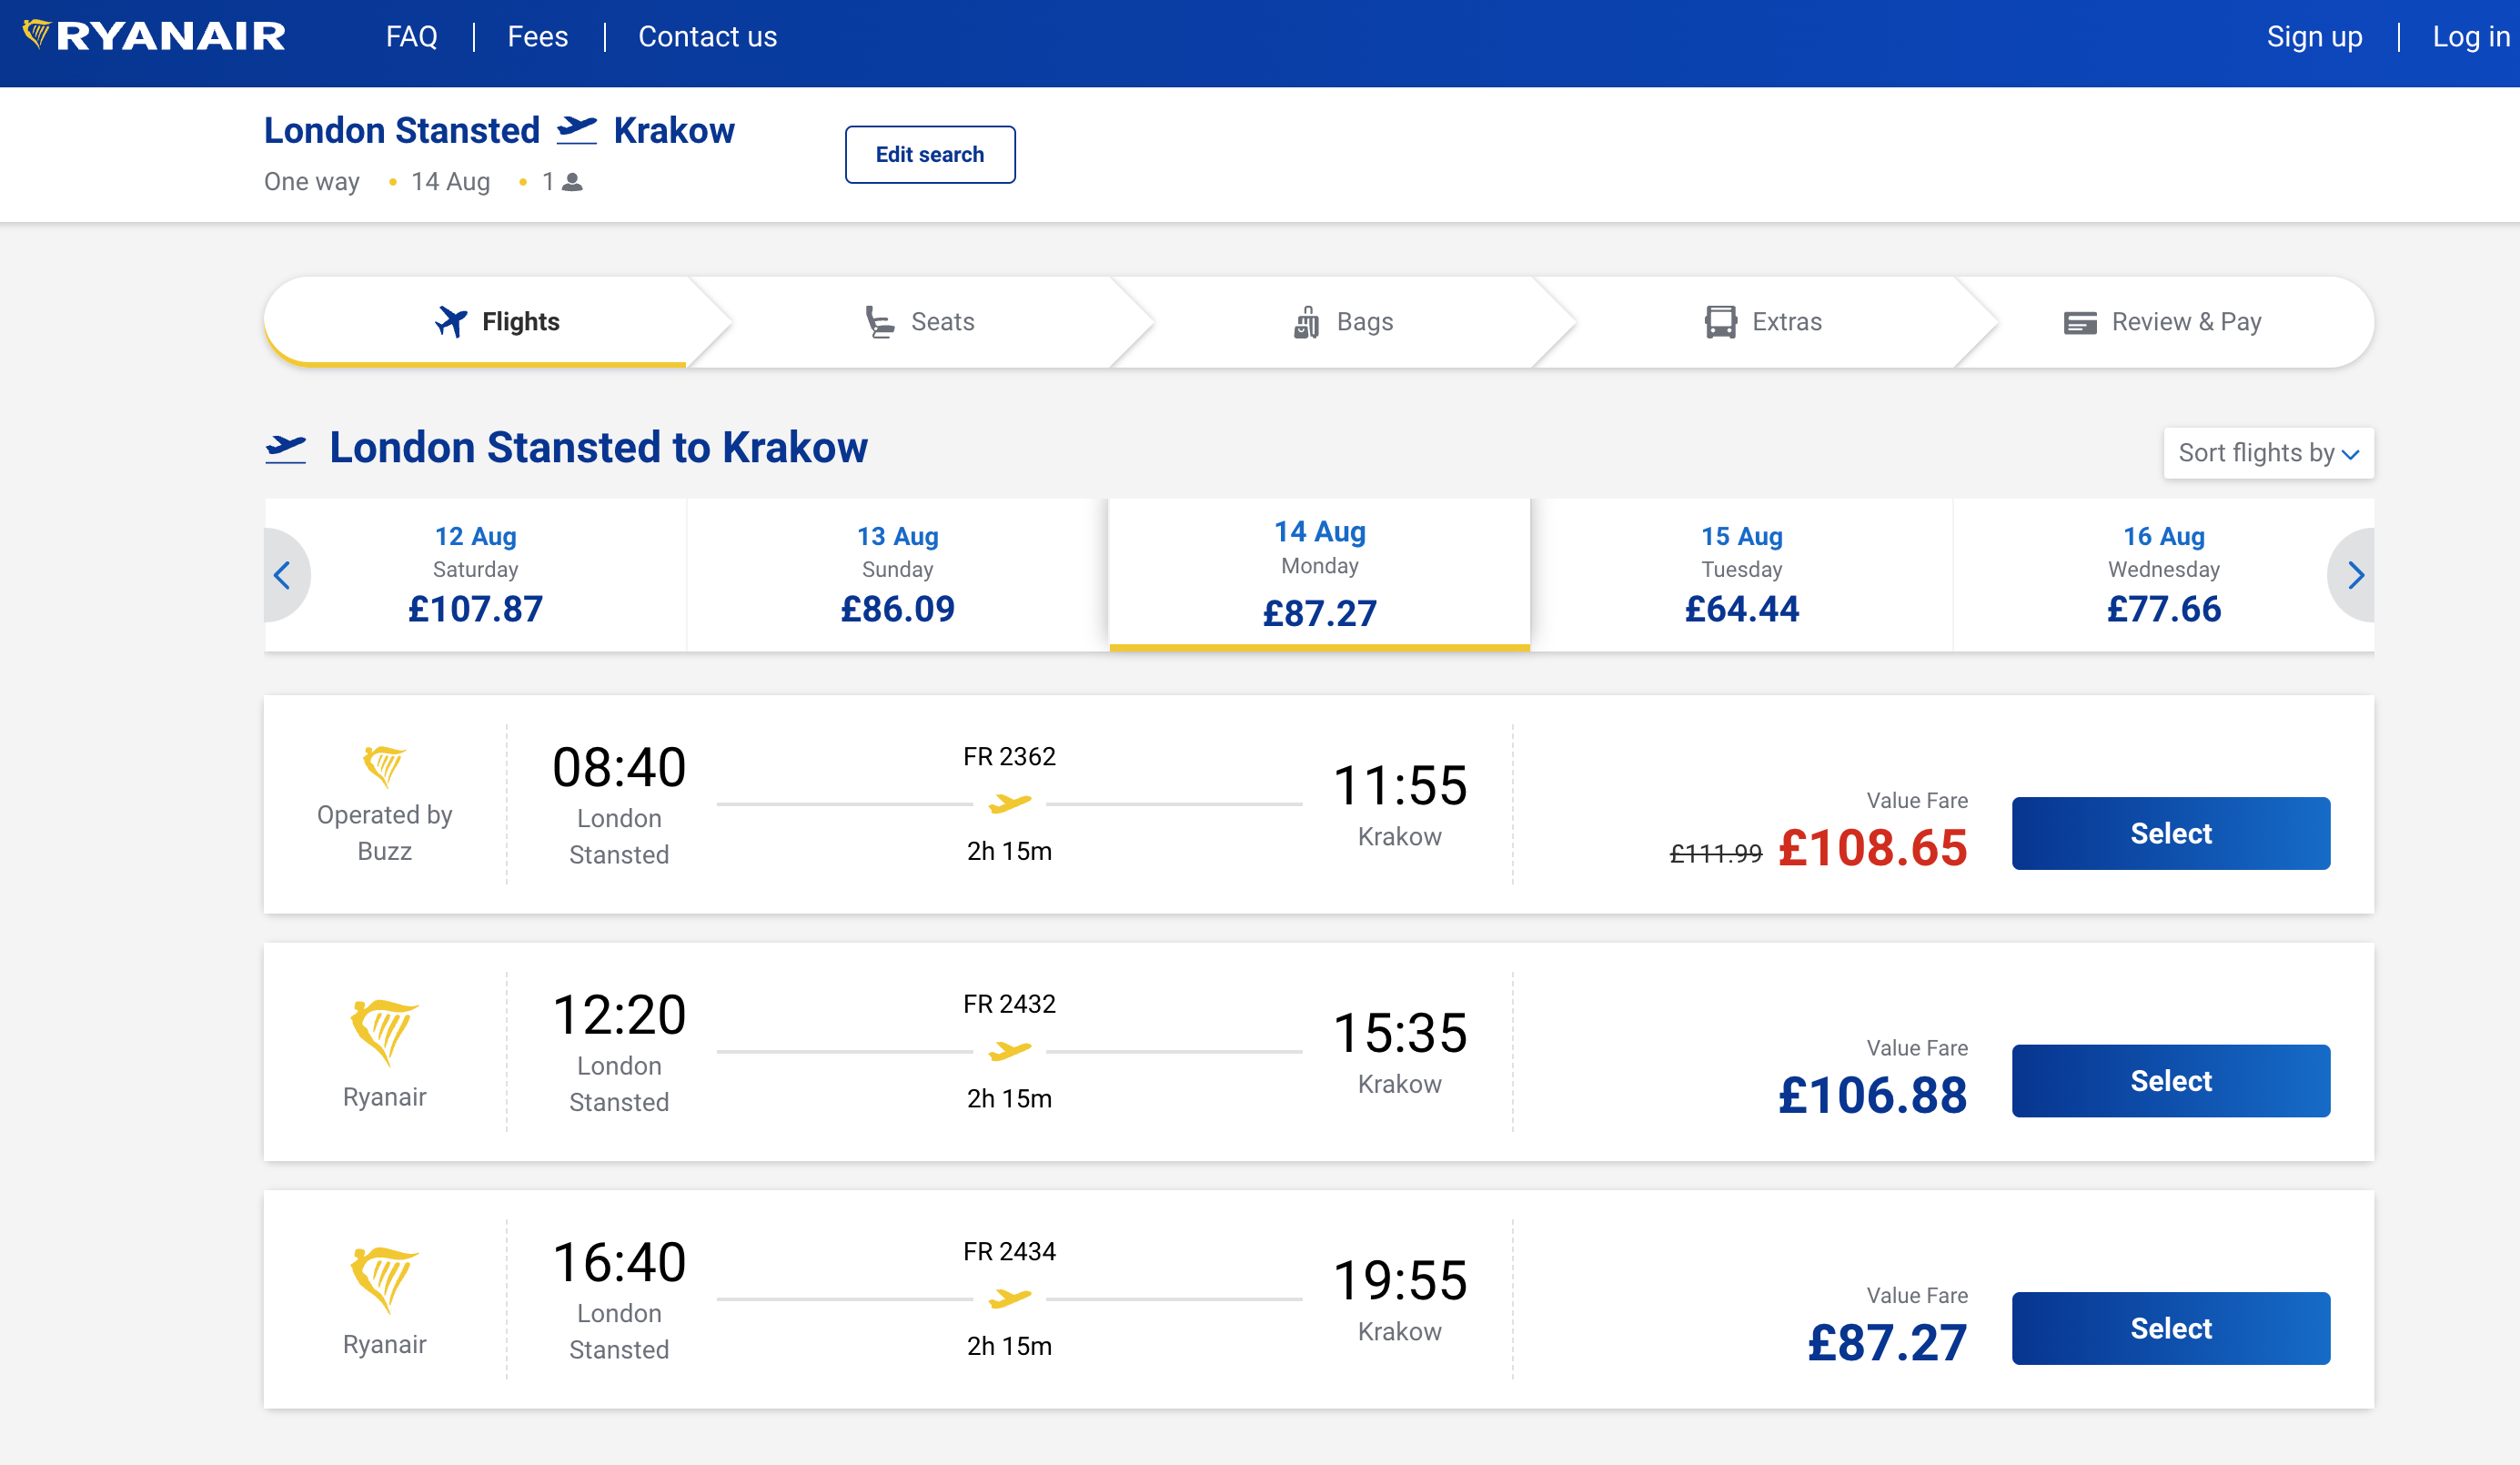 A Screenshot from Ryanair's website featuring flights from Ryanair and Buzz.